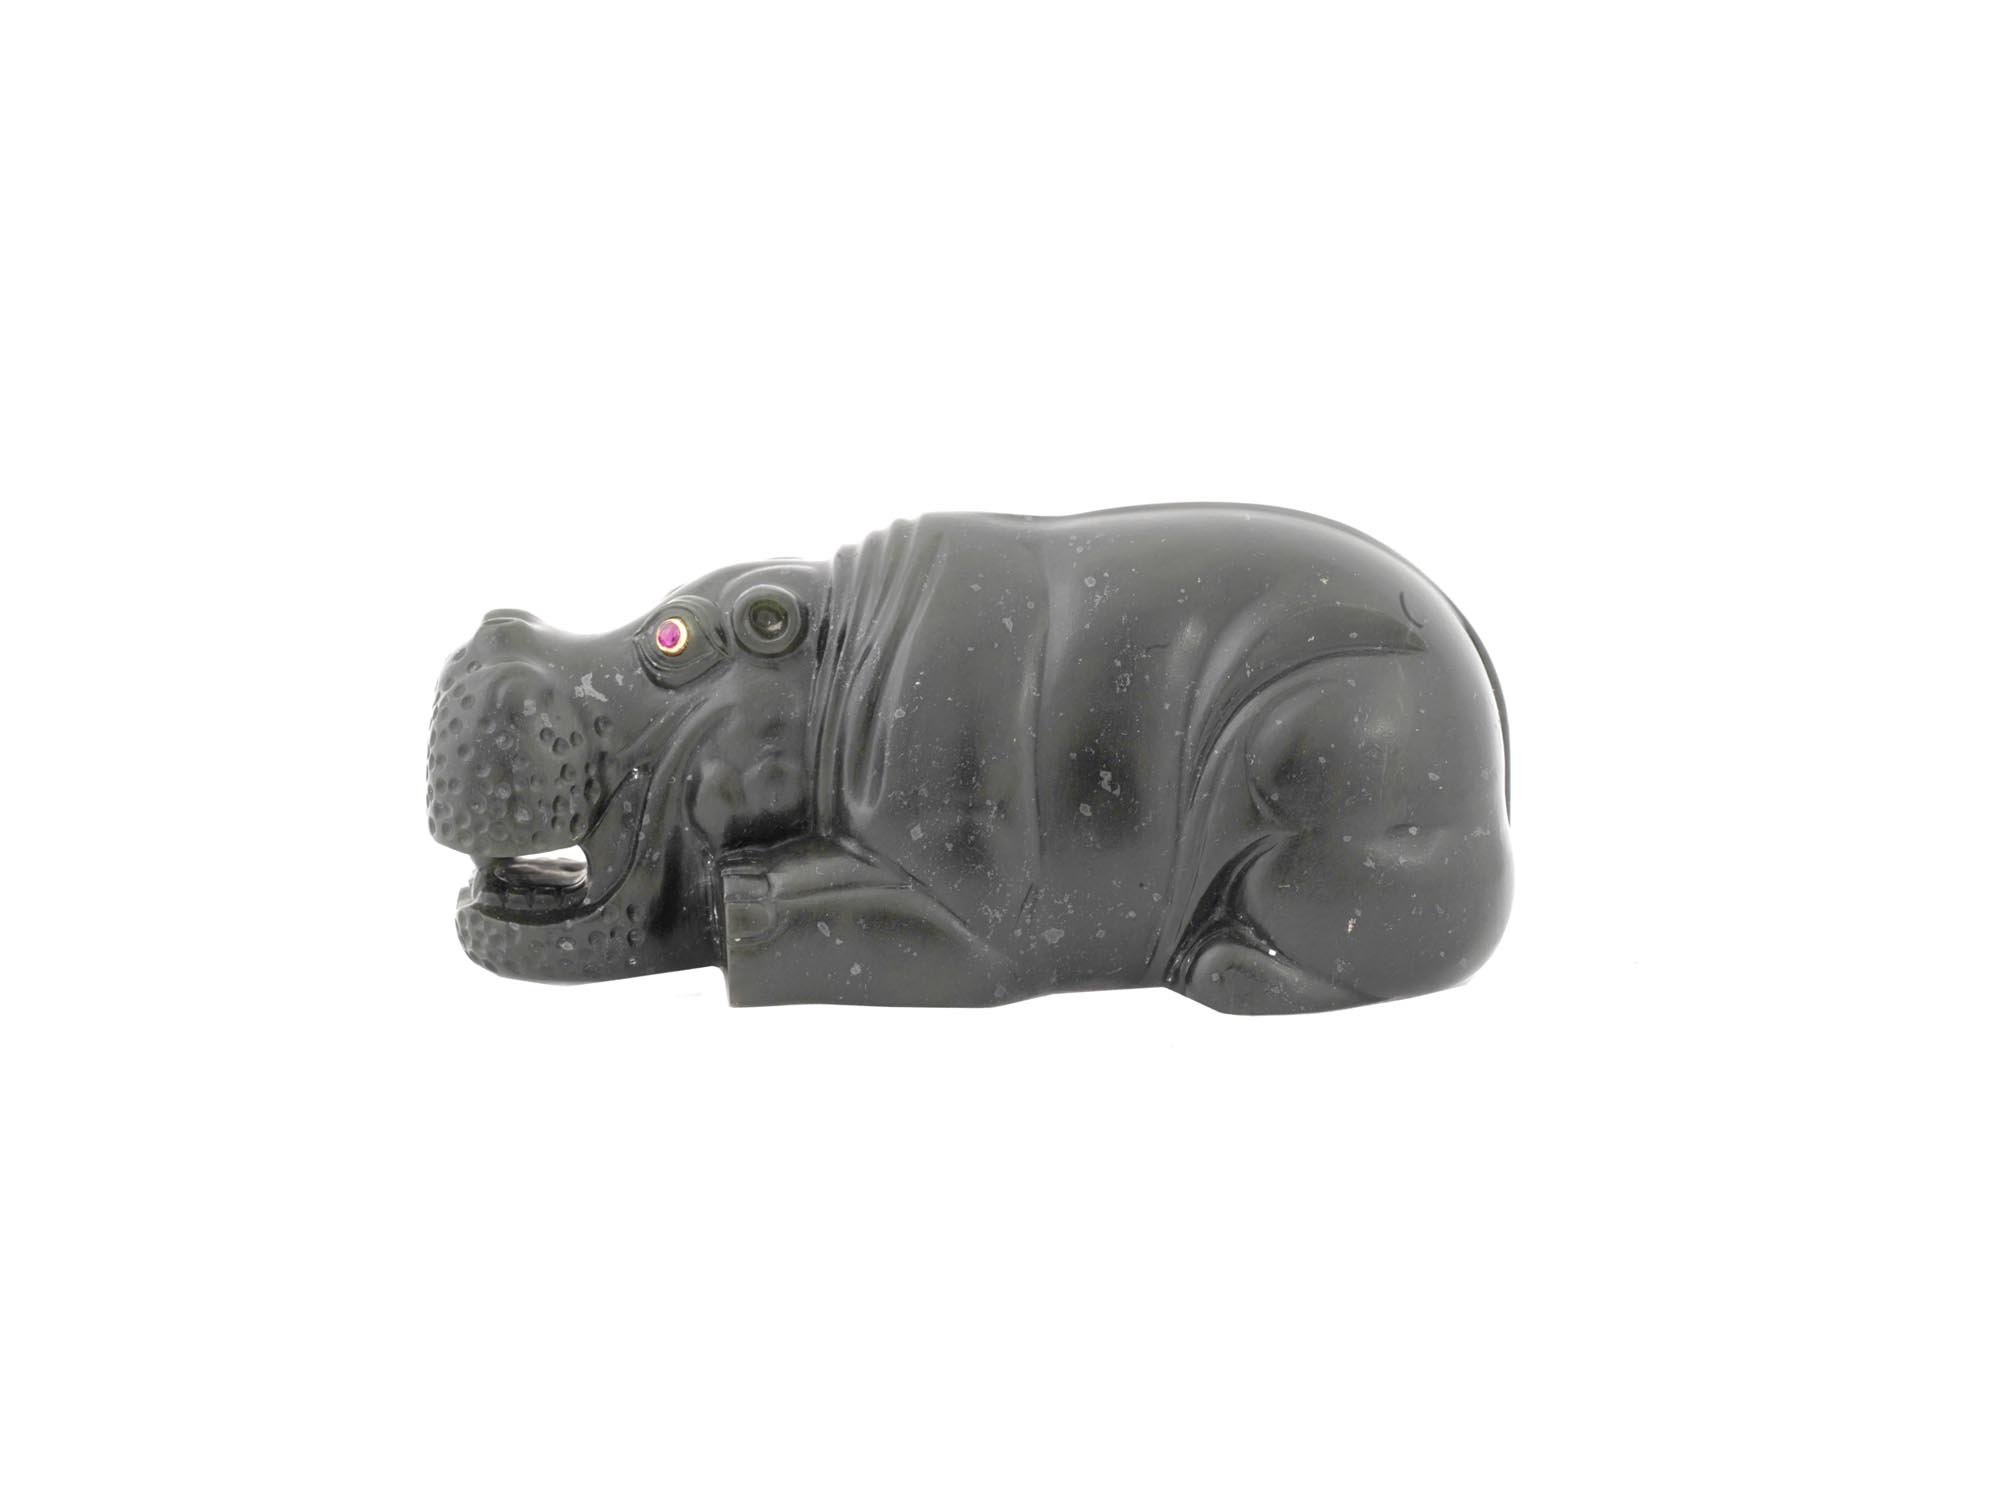 RUSSIAN CARVED BLACK JADE RUBY FIGURE OF A HIPPO PIC-3